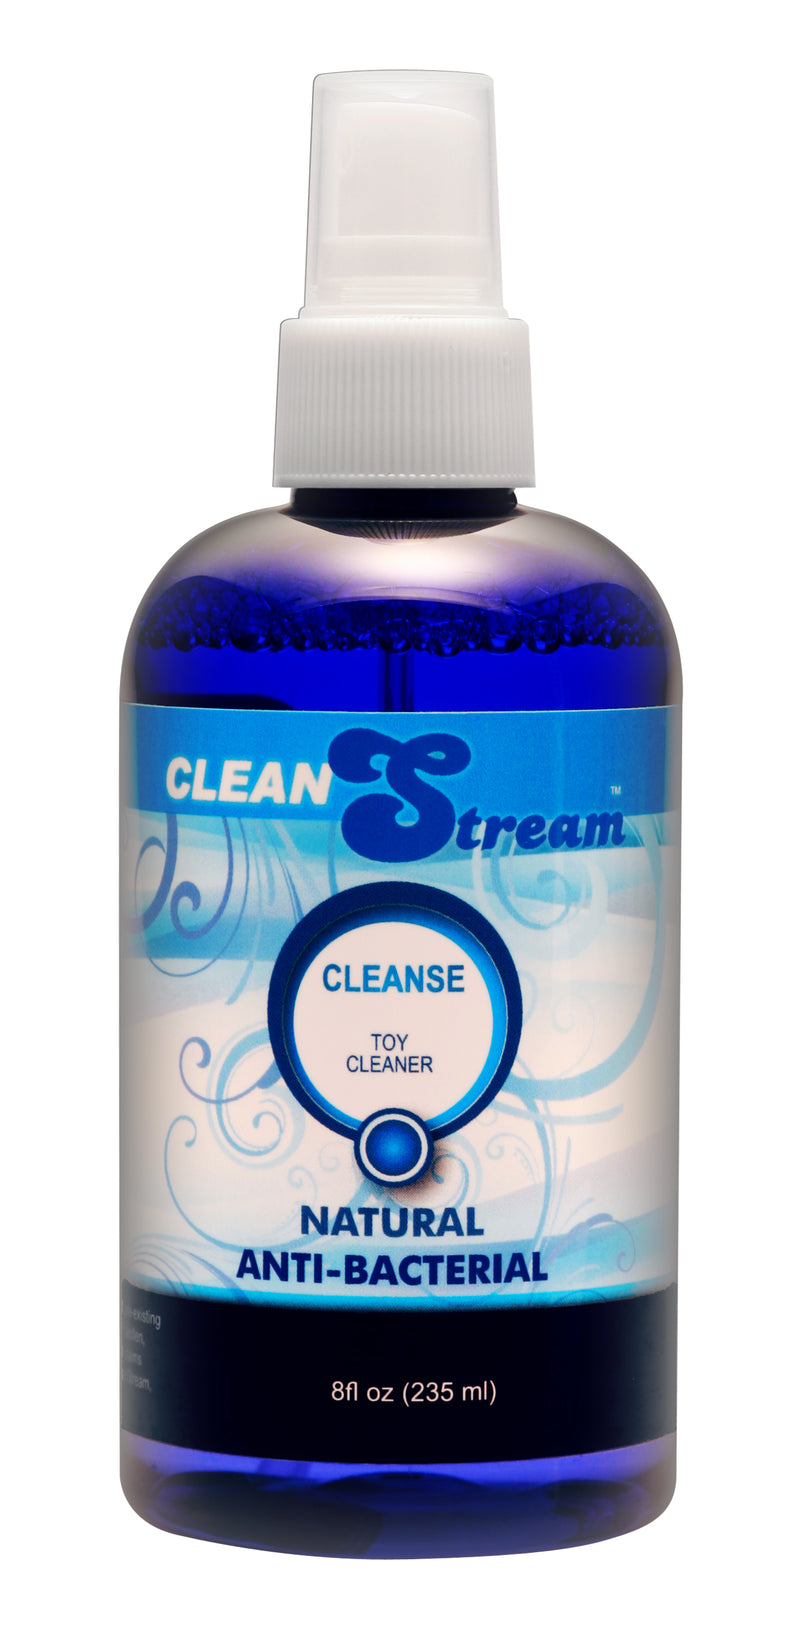 CleanStream Toy Cleaners: Keep Your Toys Germ-Free and Sparkling!